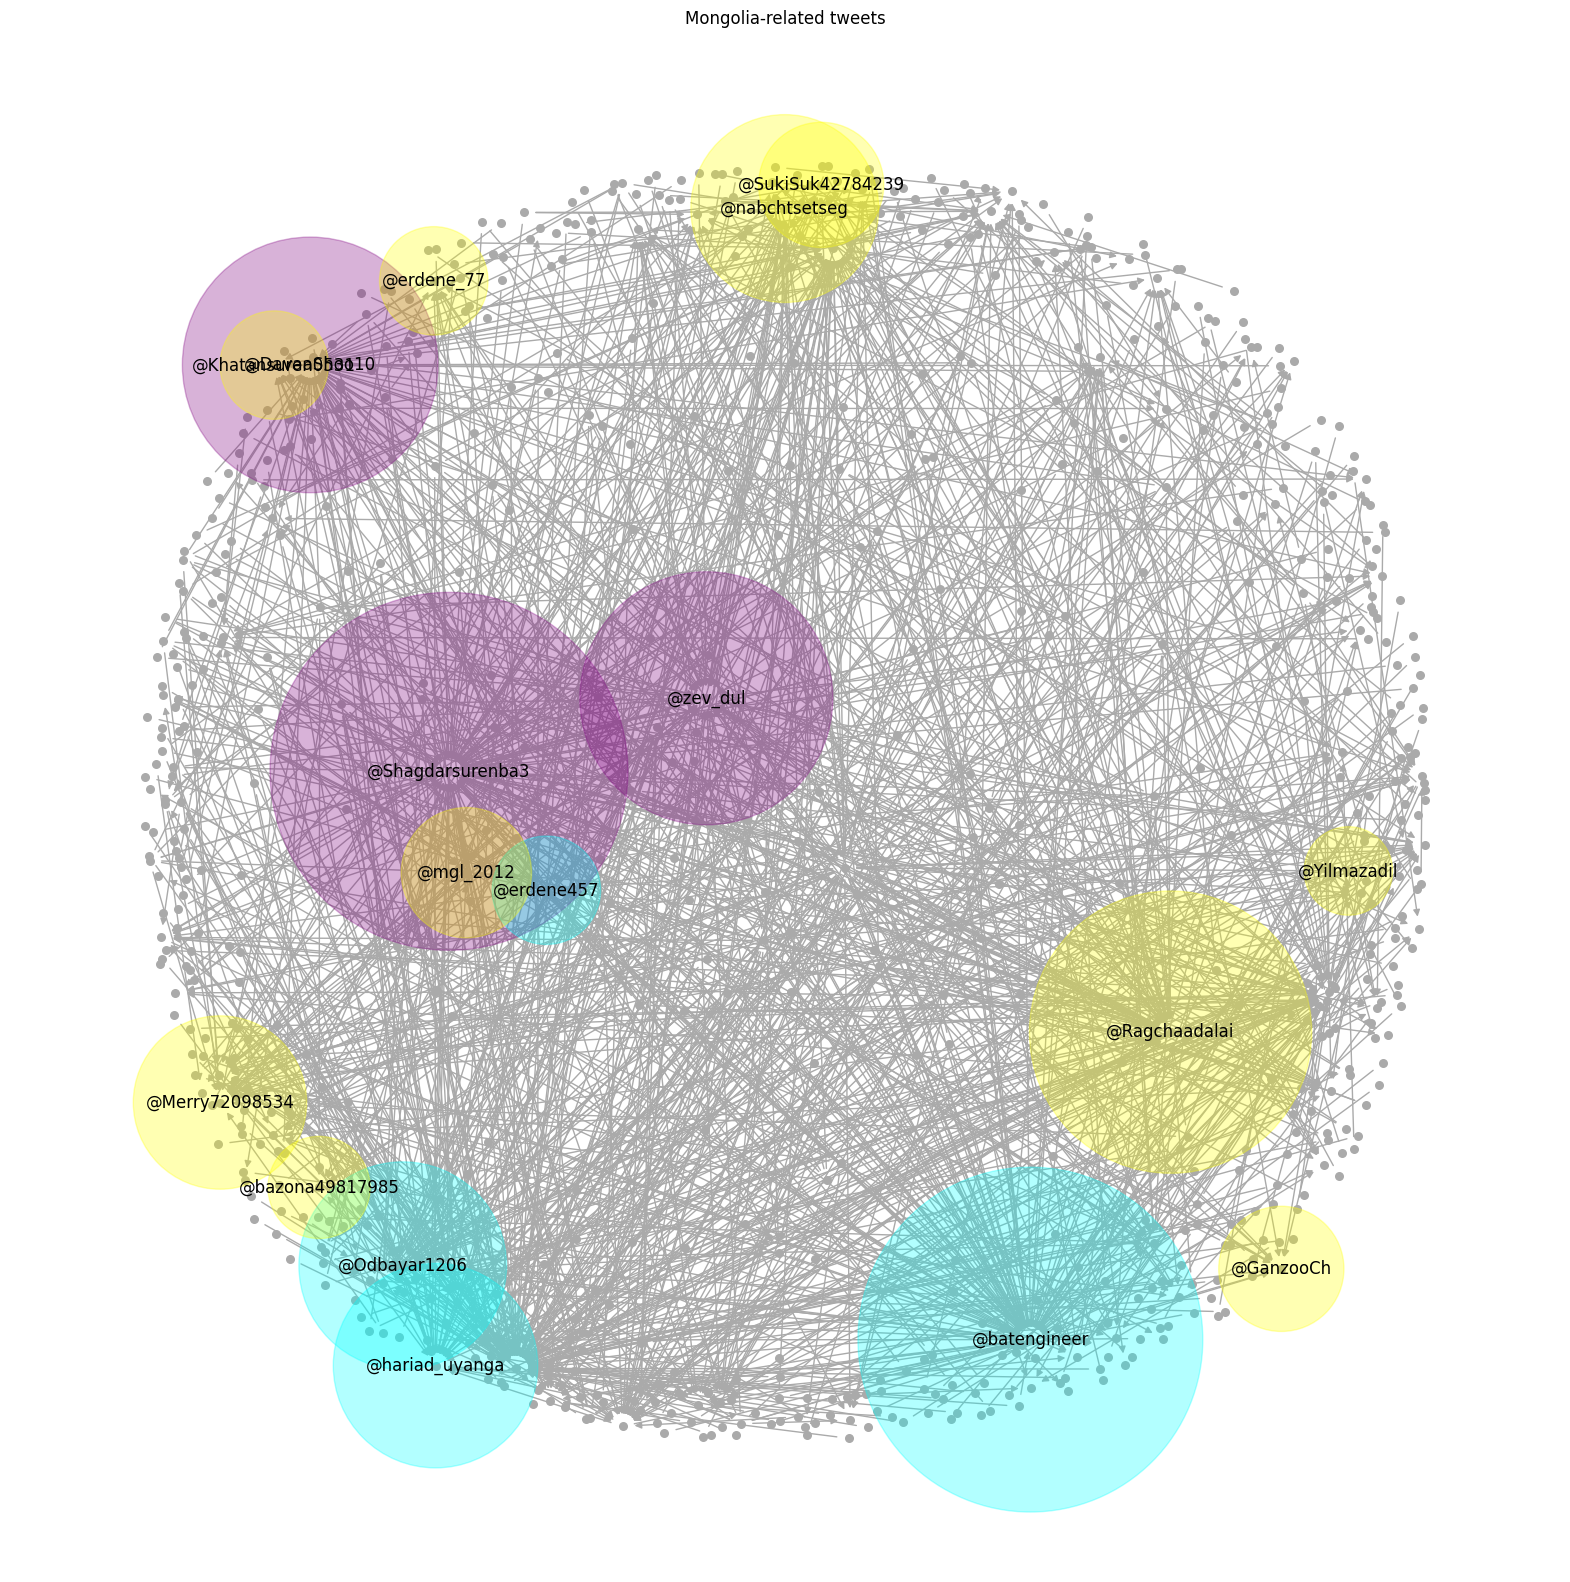 6. Modifying the graph and adding visual aids with Networkx and Matplotlib